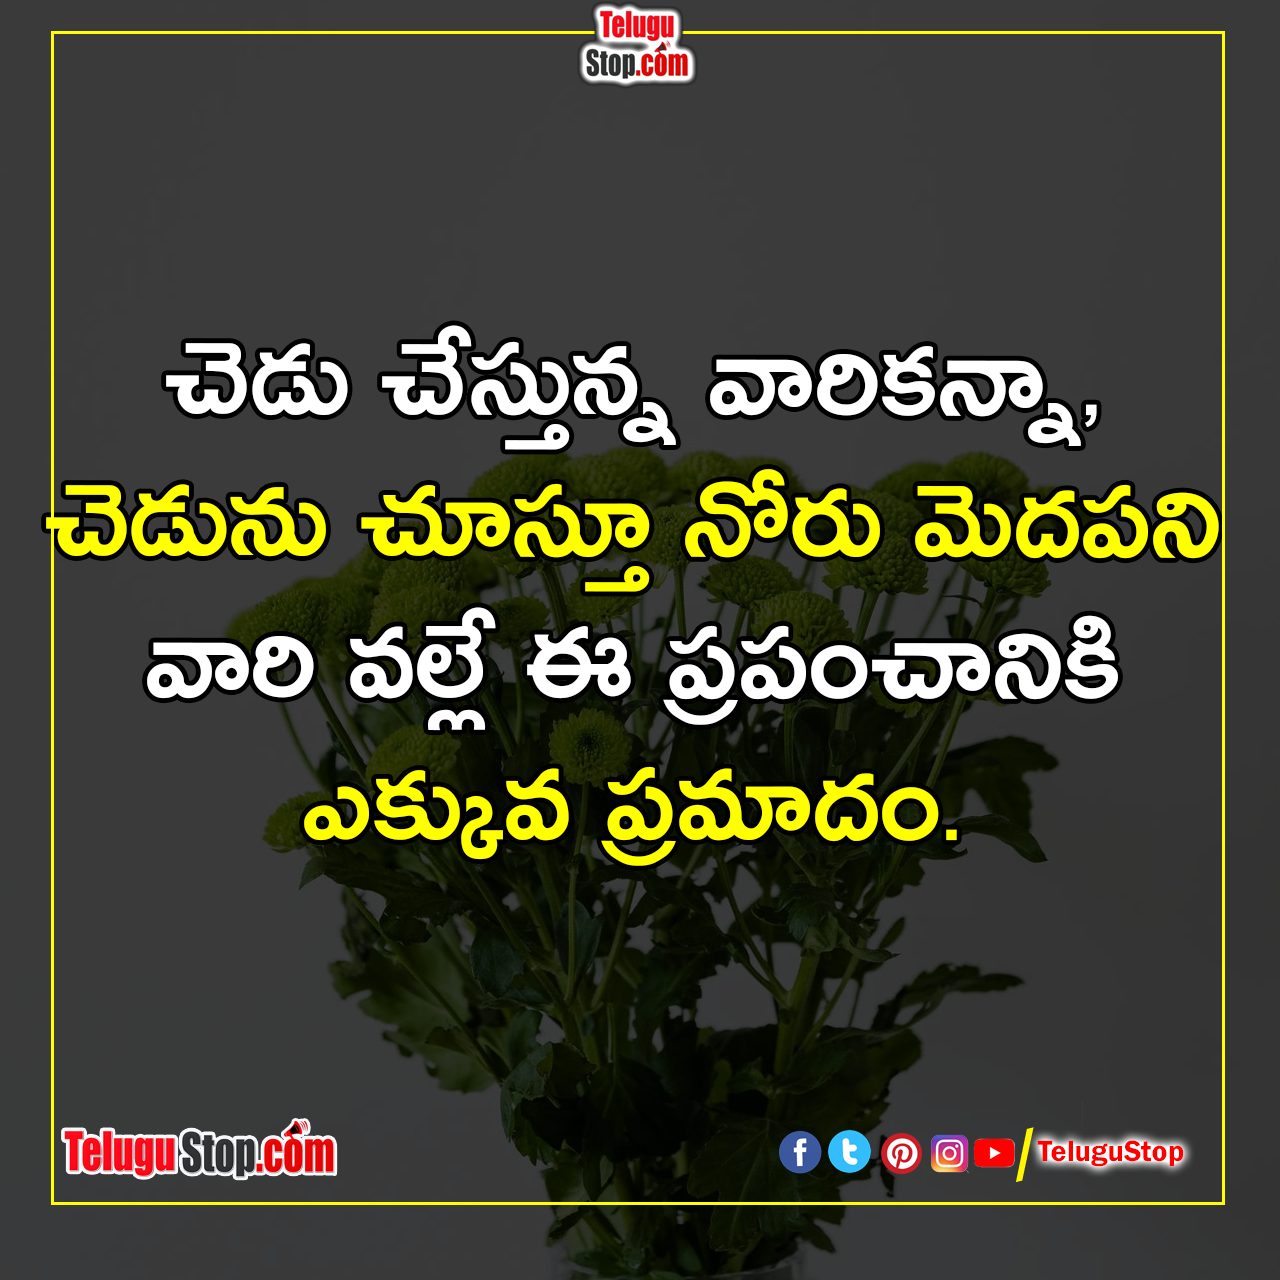 Resultendurance, Vrealhappy-Telugu Daily Quotes - Inspirational/Motivational/Love/Friendship/Good Morning Quote